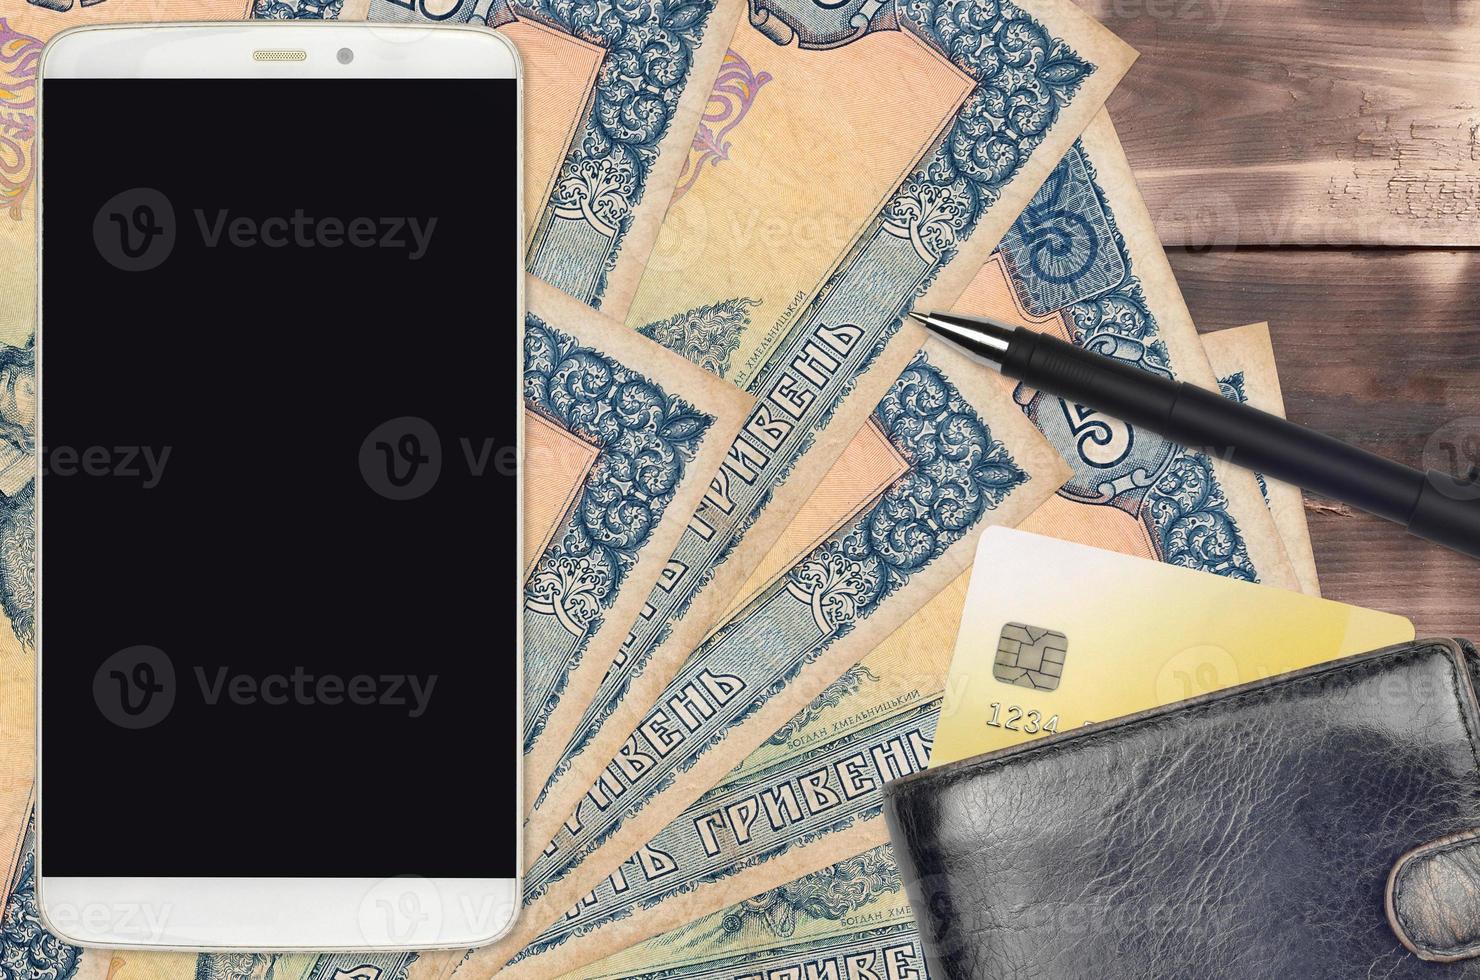 5 Ukrainian hryvnias bills and smartphone with purse and credit card. E-payments or e-commerce concept. Online shopping and business with portable devices photo